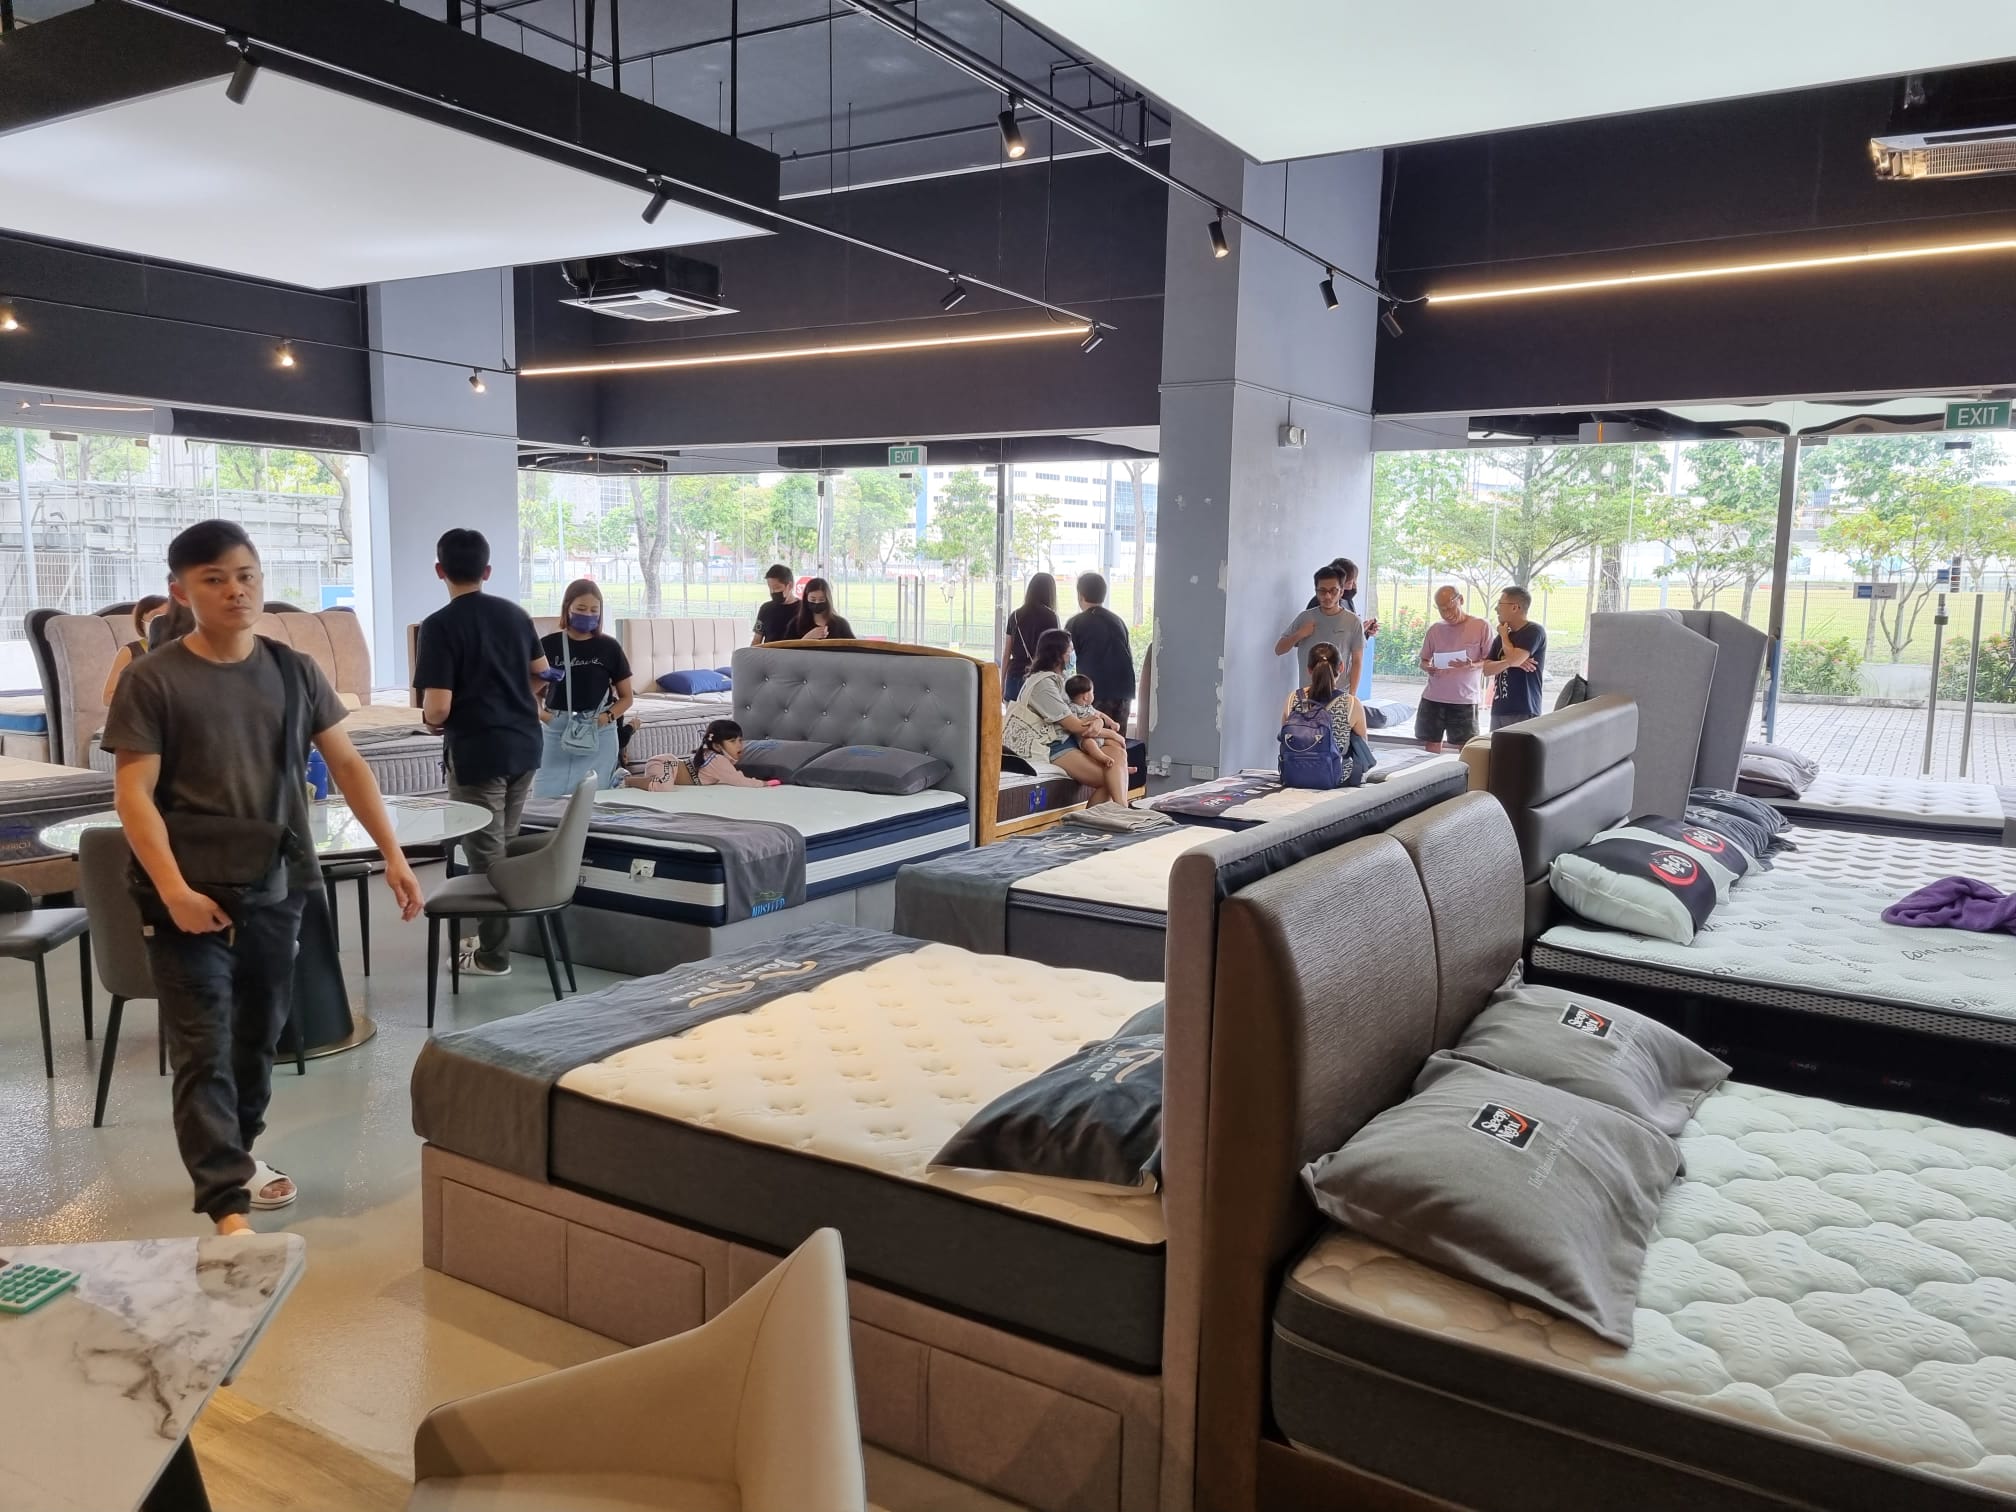 Lobang: Furniture Store Offering $88 Storage Beds When You Purchase A Mattress from 1 - 12 Mar 23 - 11